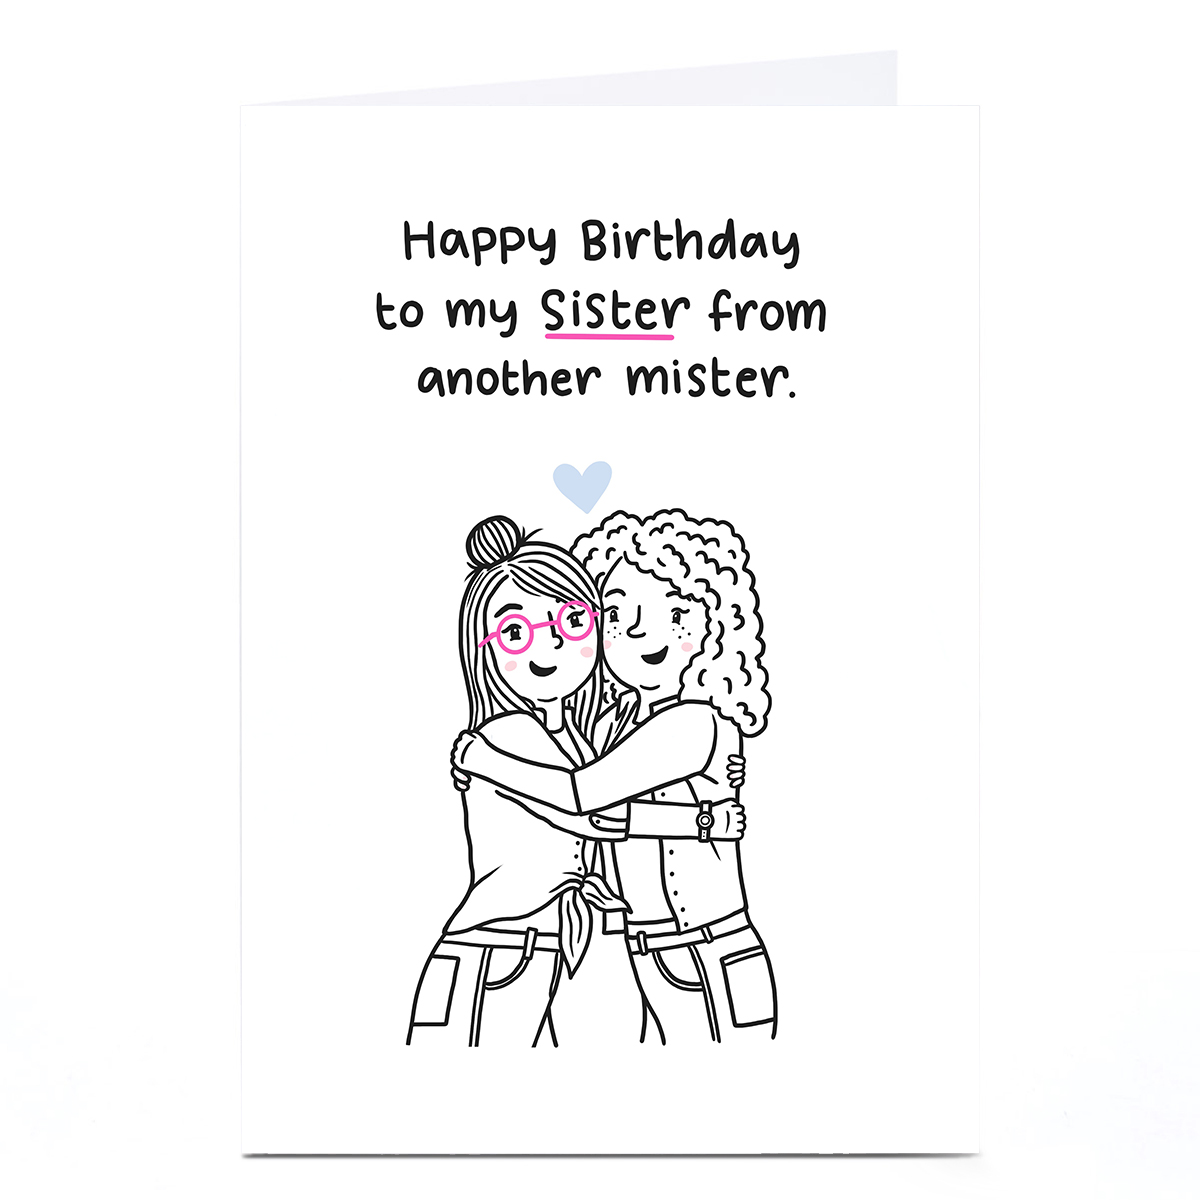 Personalised Blue Kiwi Birthday Card - Sister From Another Mister